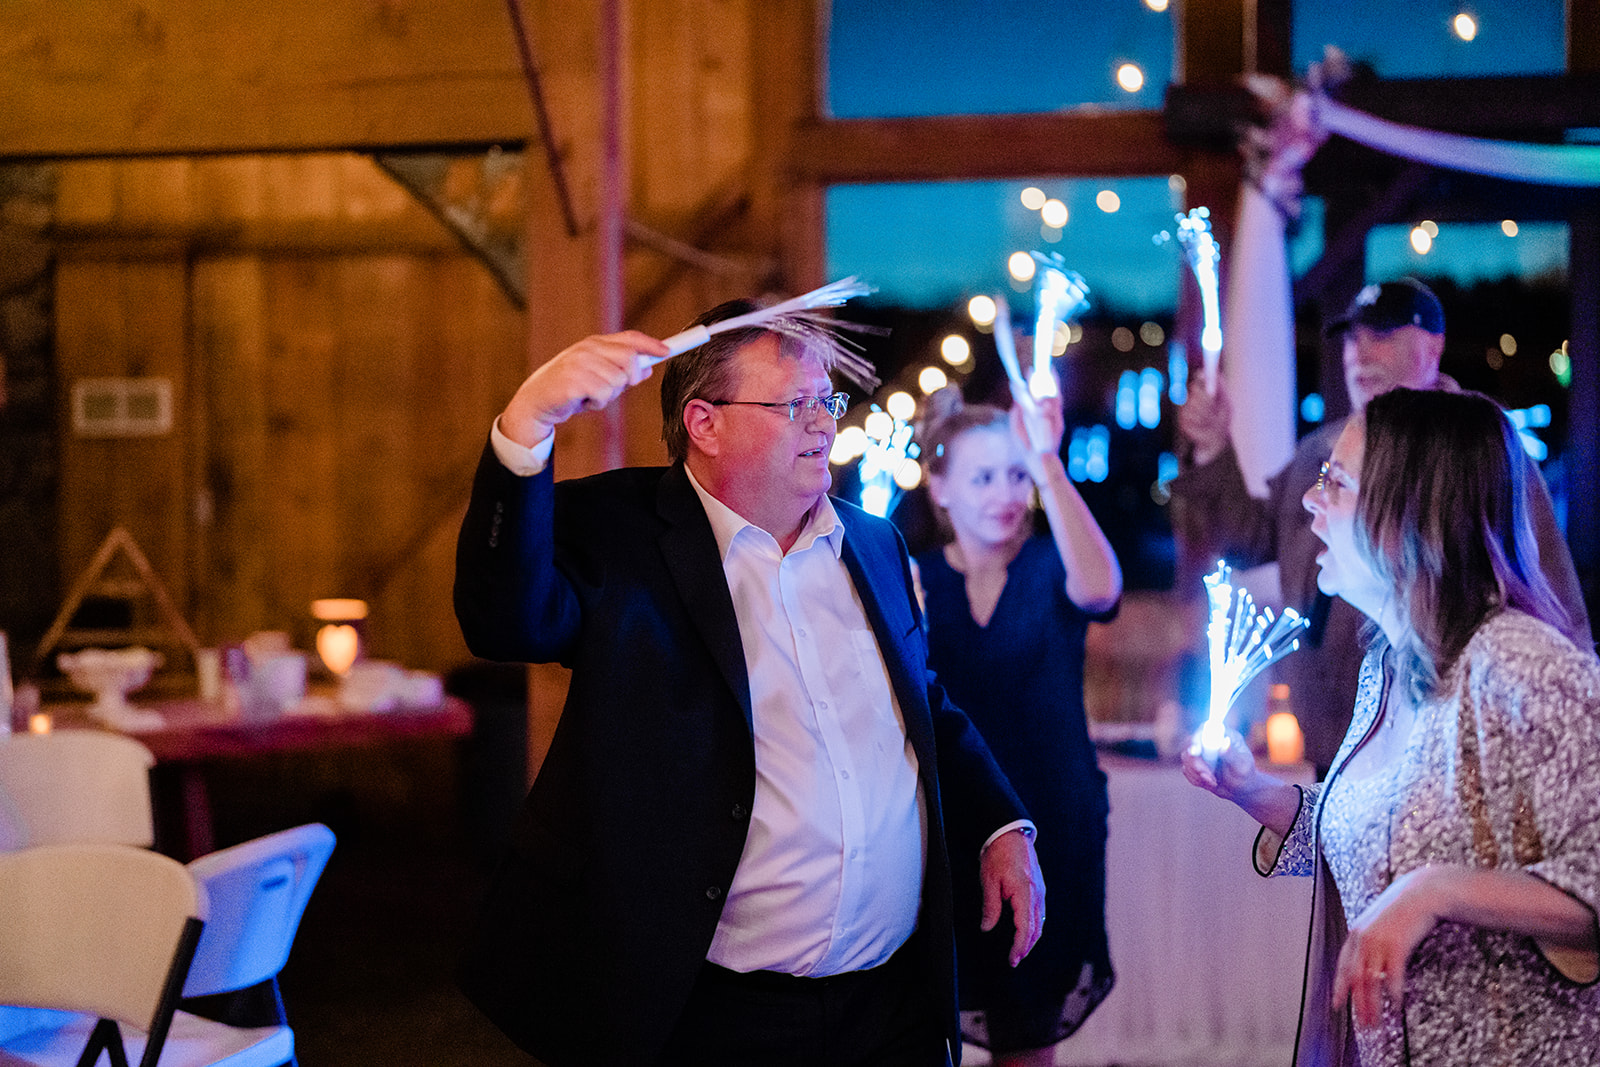 Priest dancing at a Cattle Barn Wedding